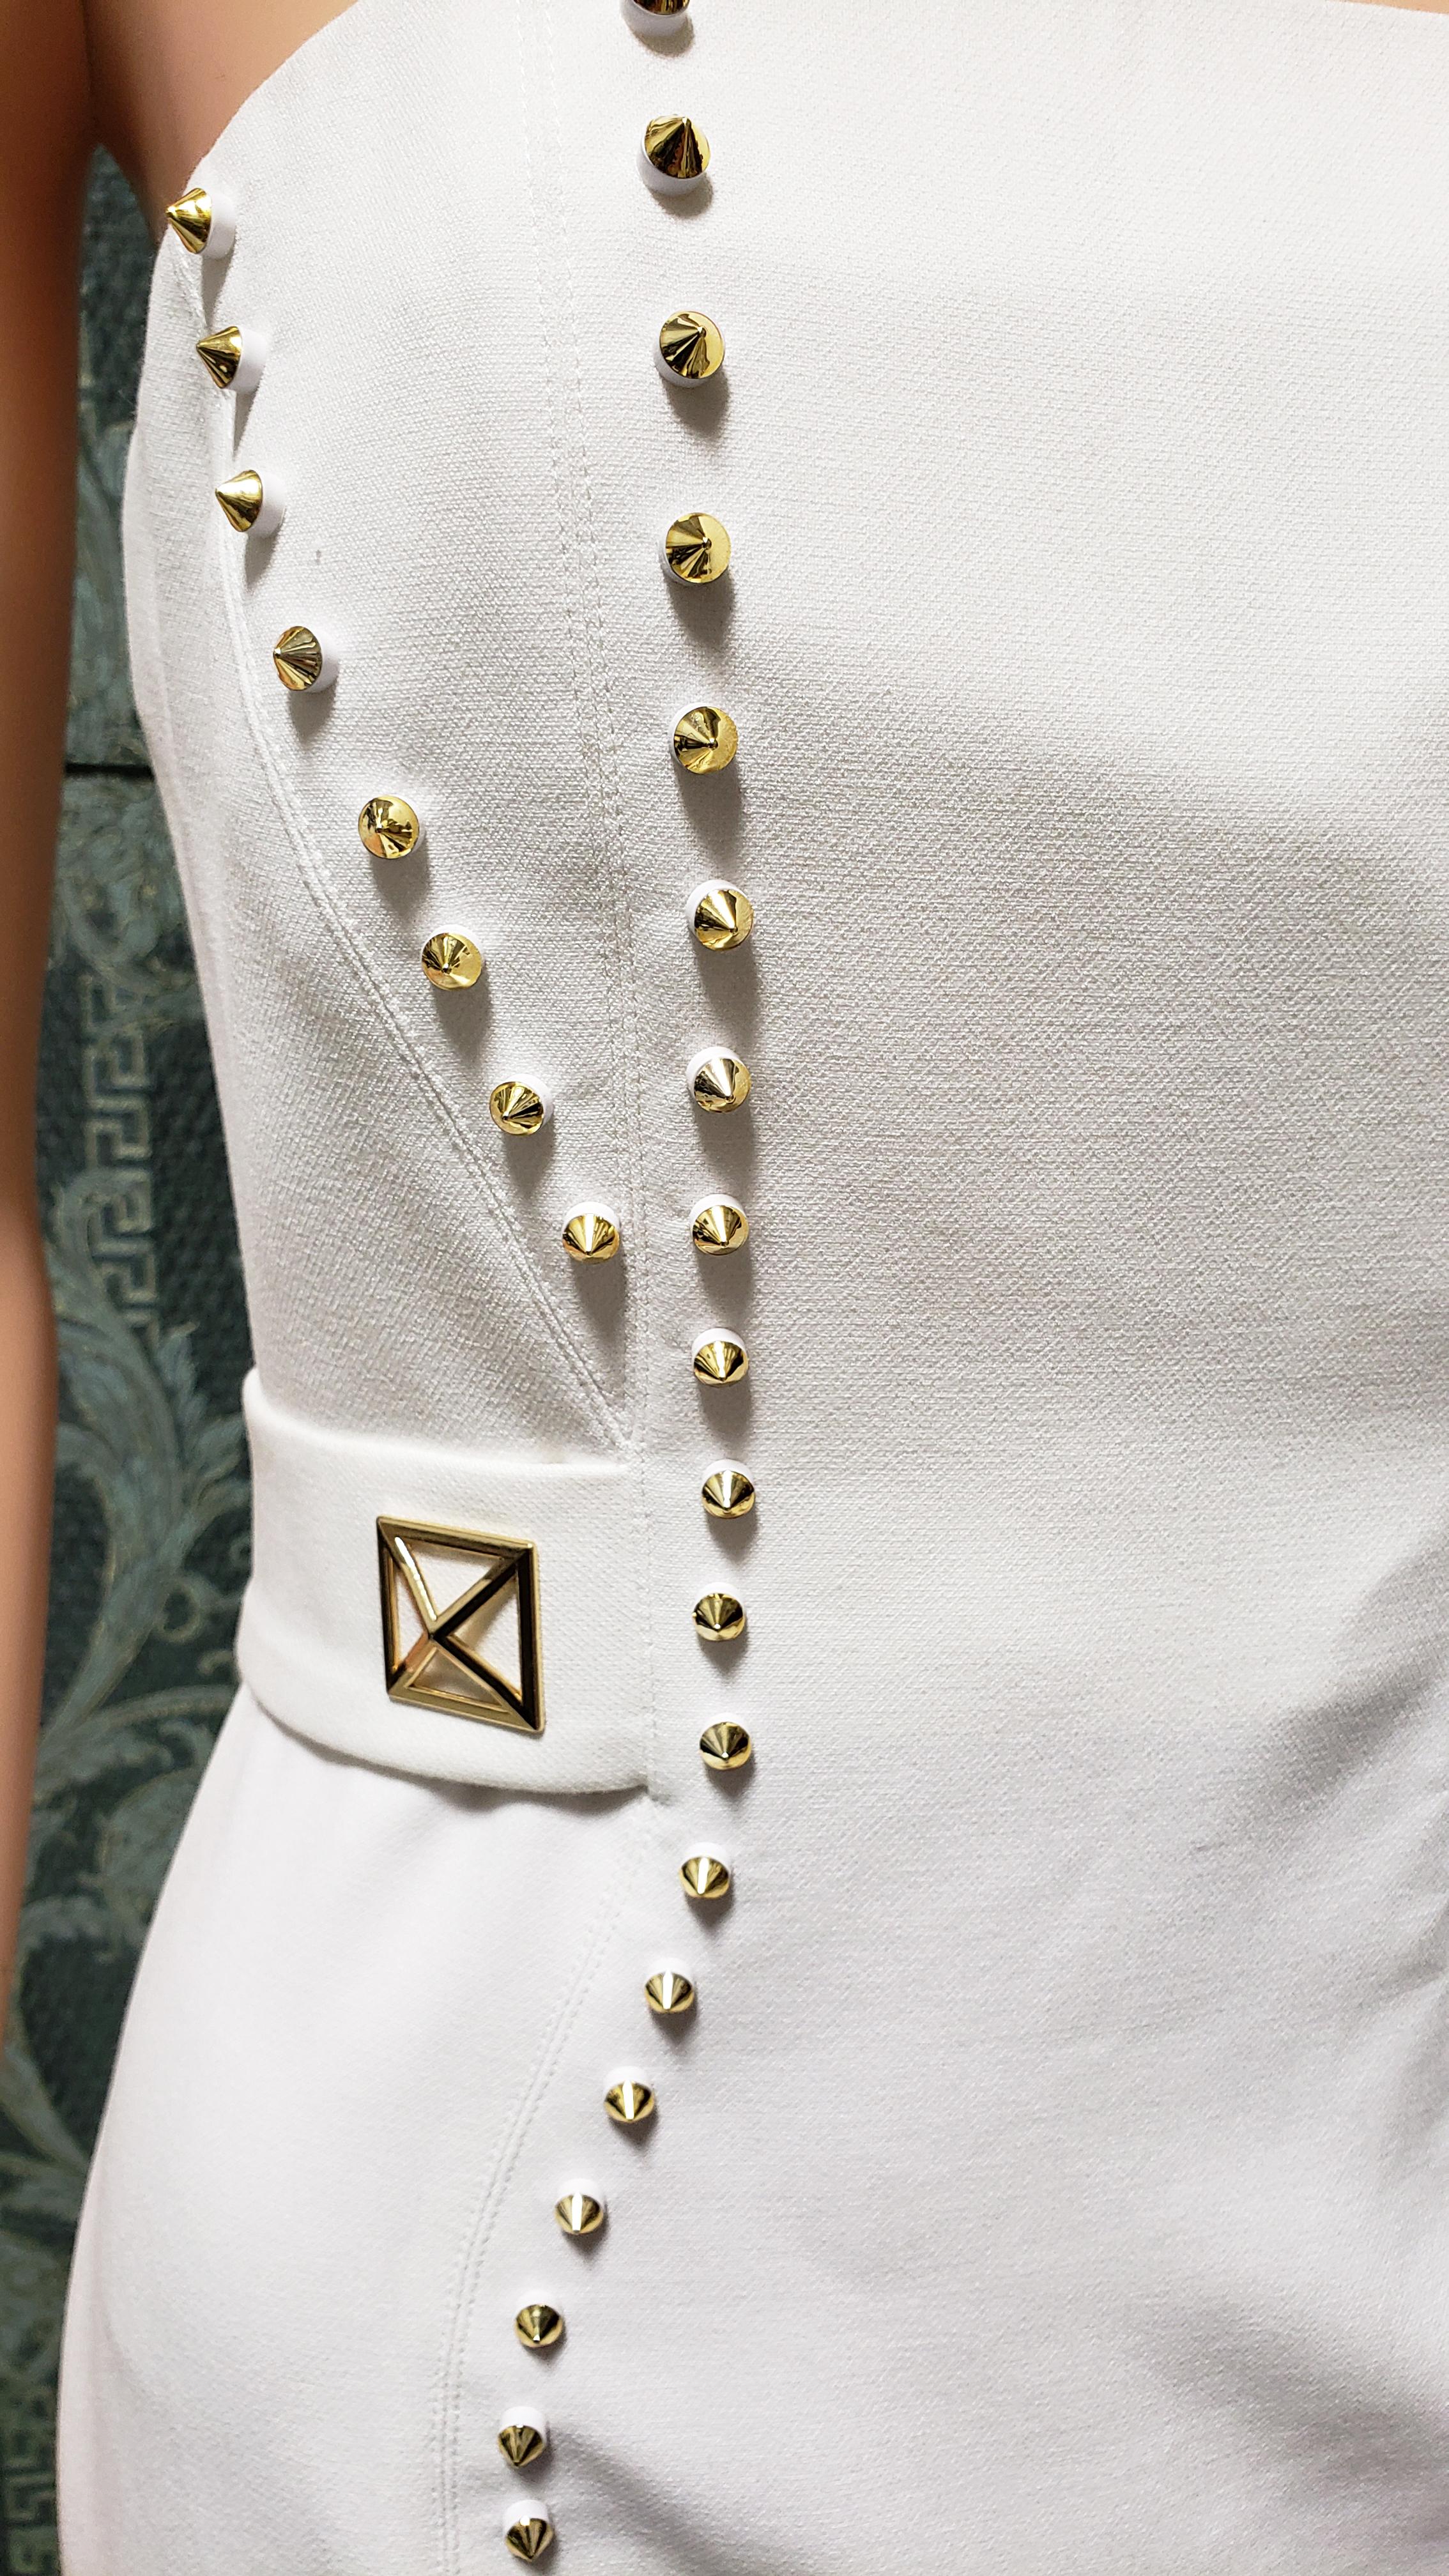 New VERSACE COLLECTION STUD EMBELLISHED WHITE DRESS 40 - 4 For Sale 1